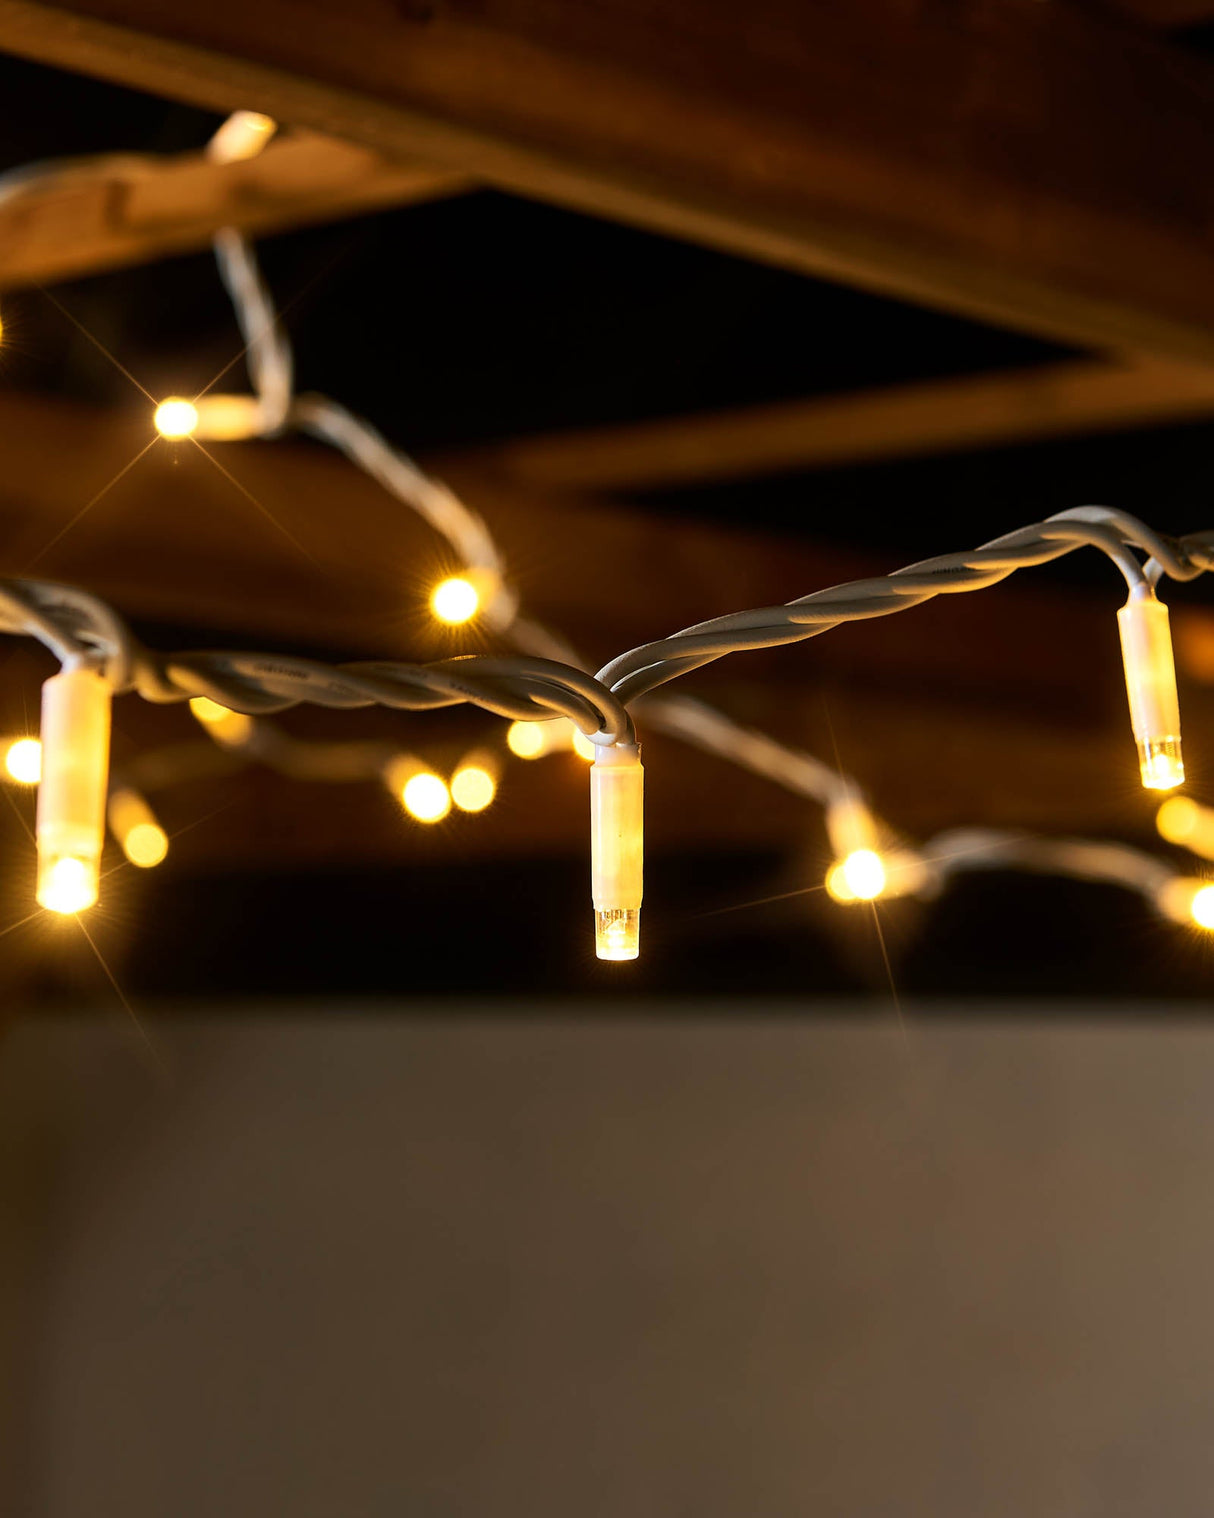 LINK PRO Twinkle LED String Lights, White Cable, Warm White / White